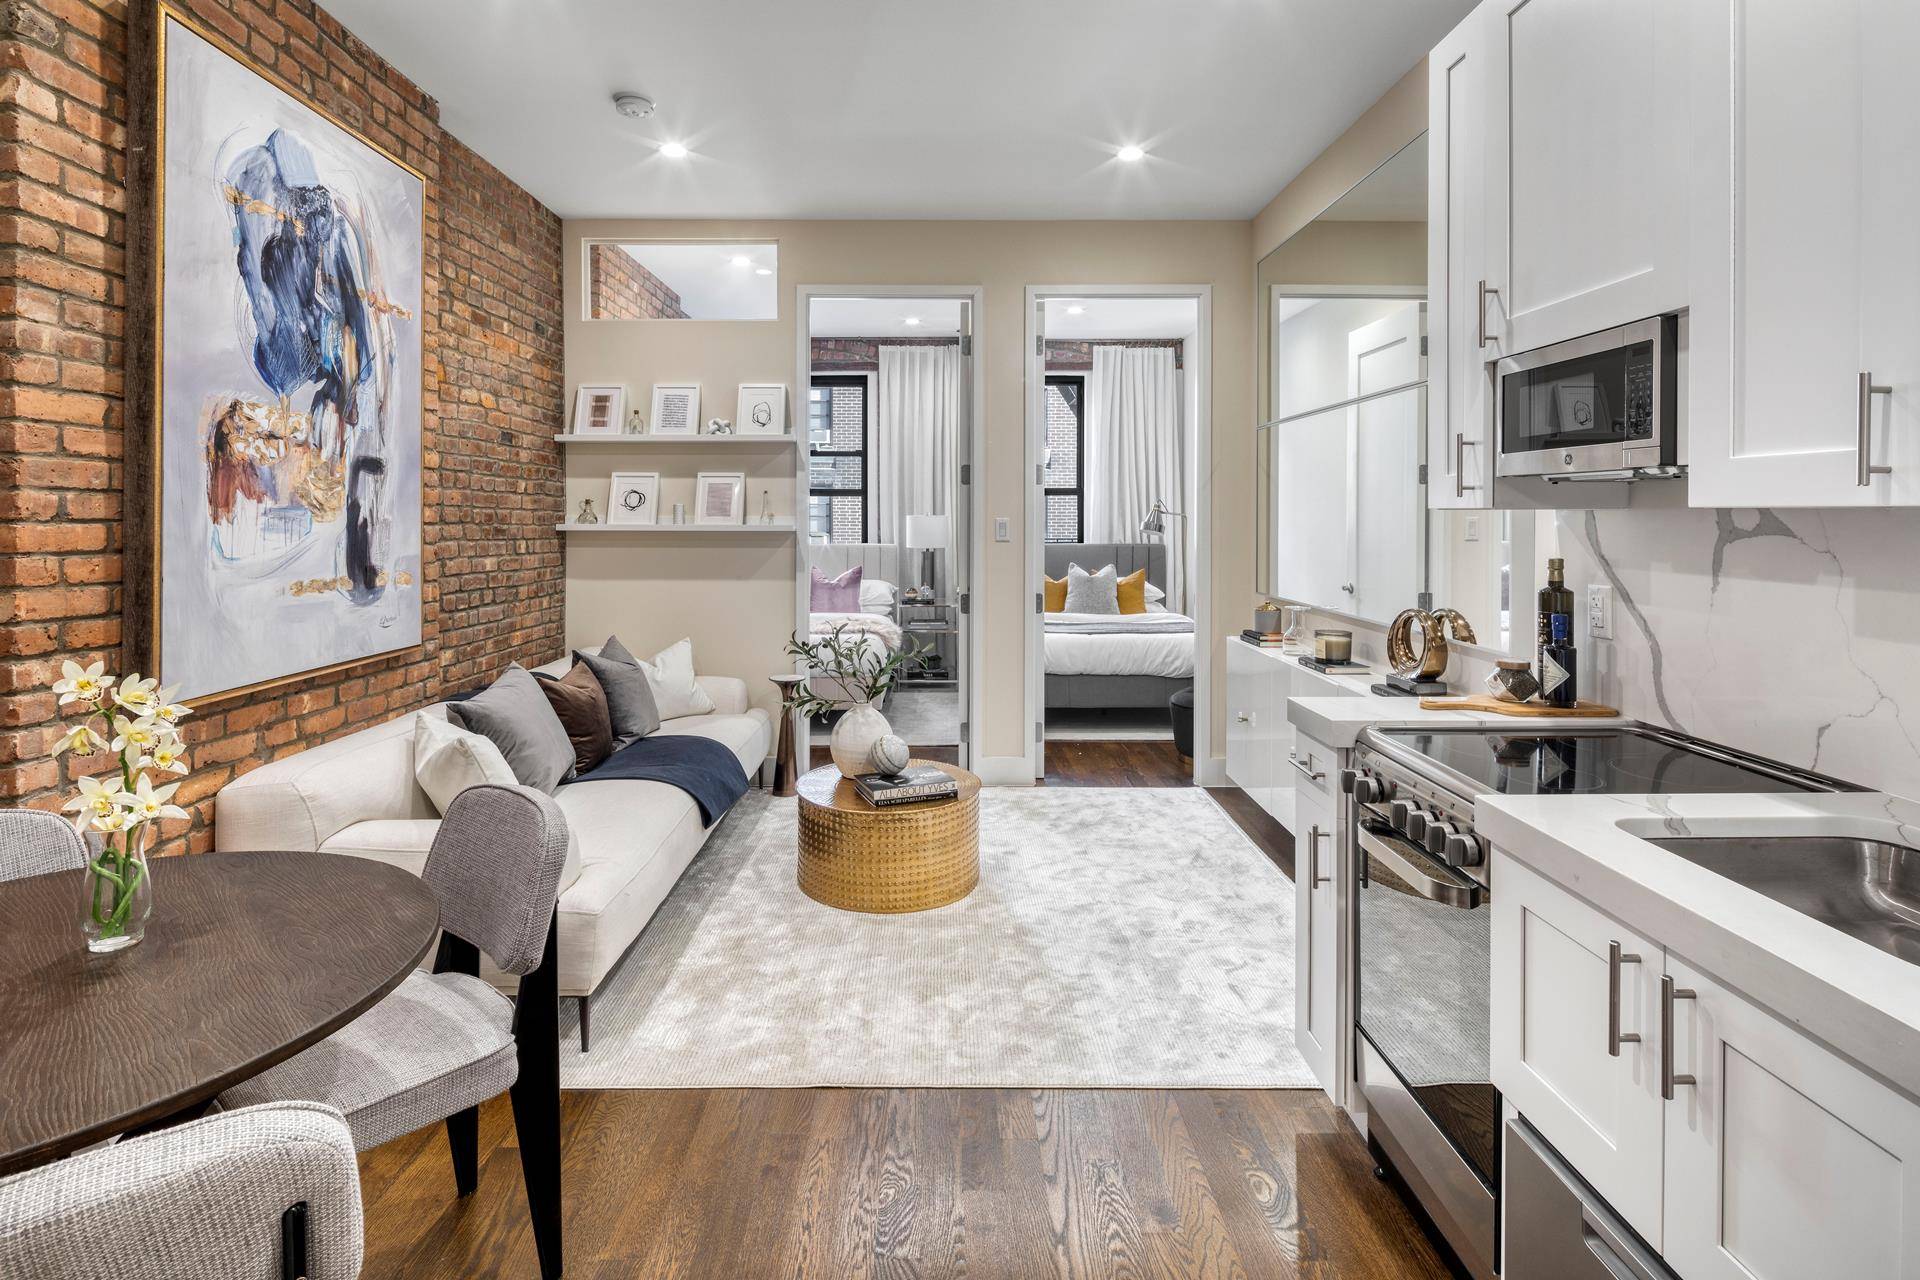 Located in prime this beautifully gut renovated 3BR features plenty of charm, including exposed brick walls and hardwood floors.